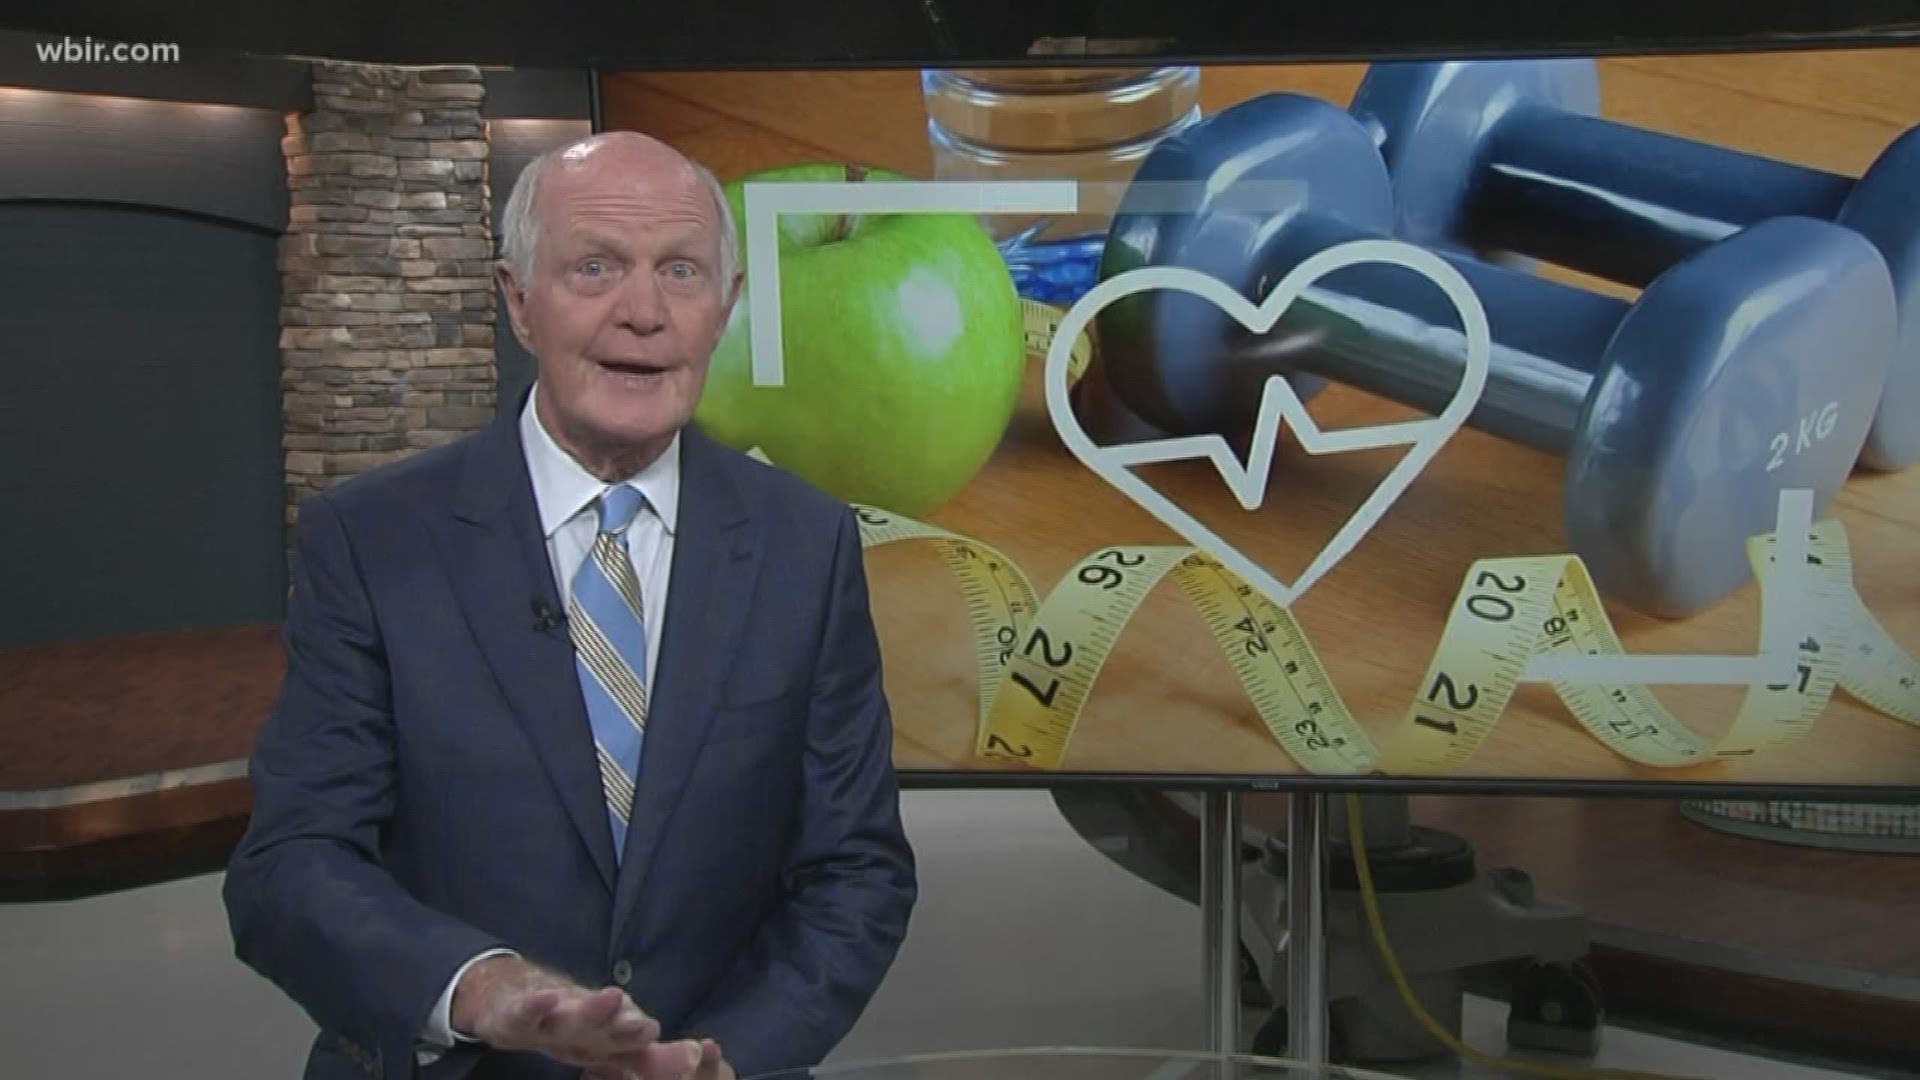 Dr. Bob discusses a few lifestyle changes that could help prevent Alzheimer's Disease and dementia.